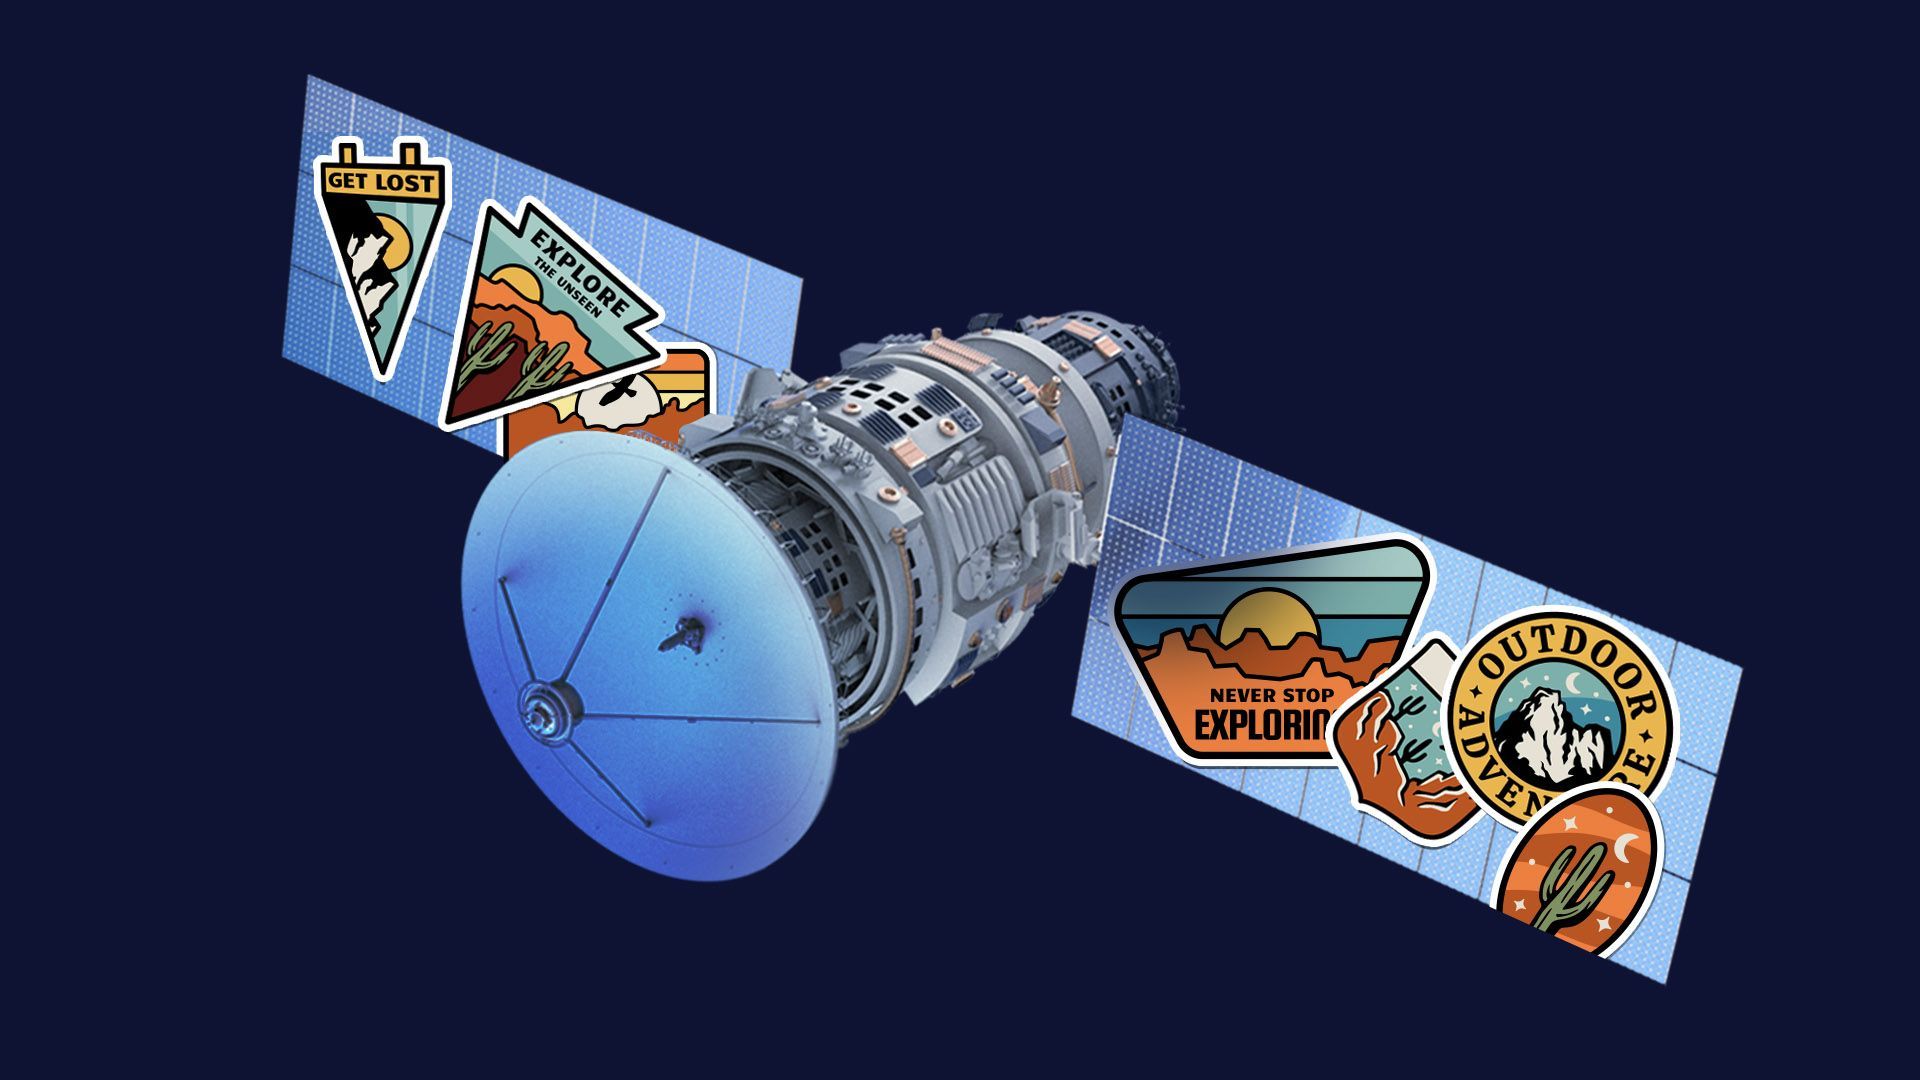 Illustration of a satellite with outdoors stickers all over the panels